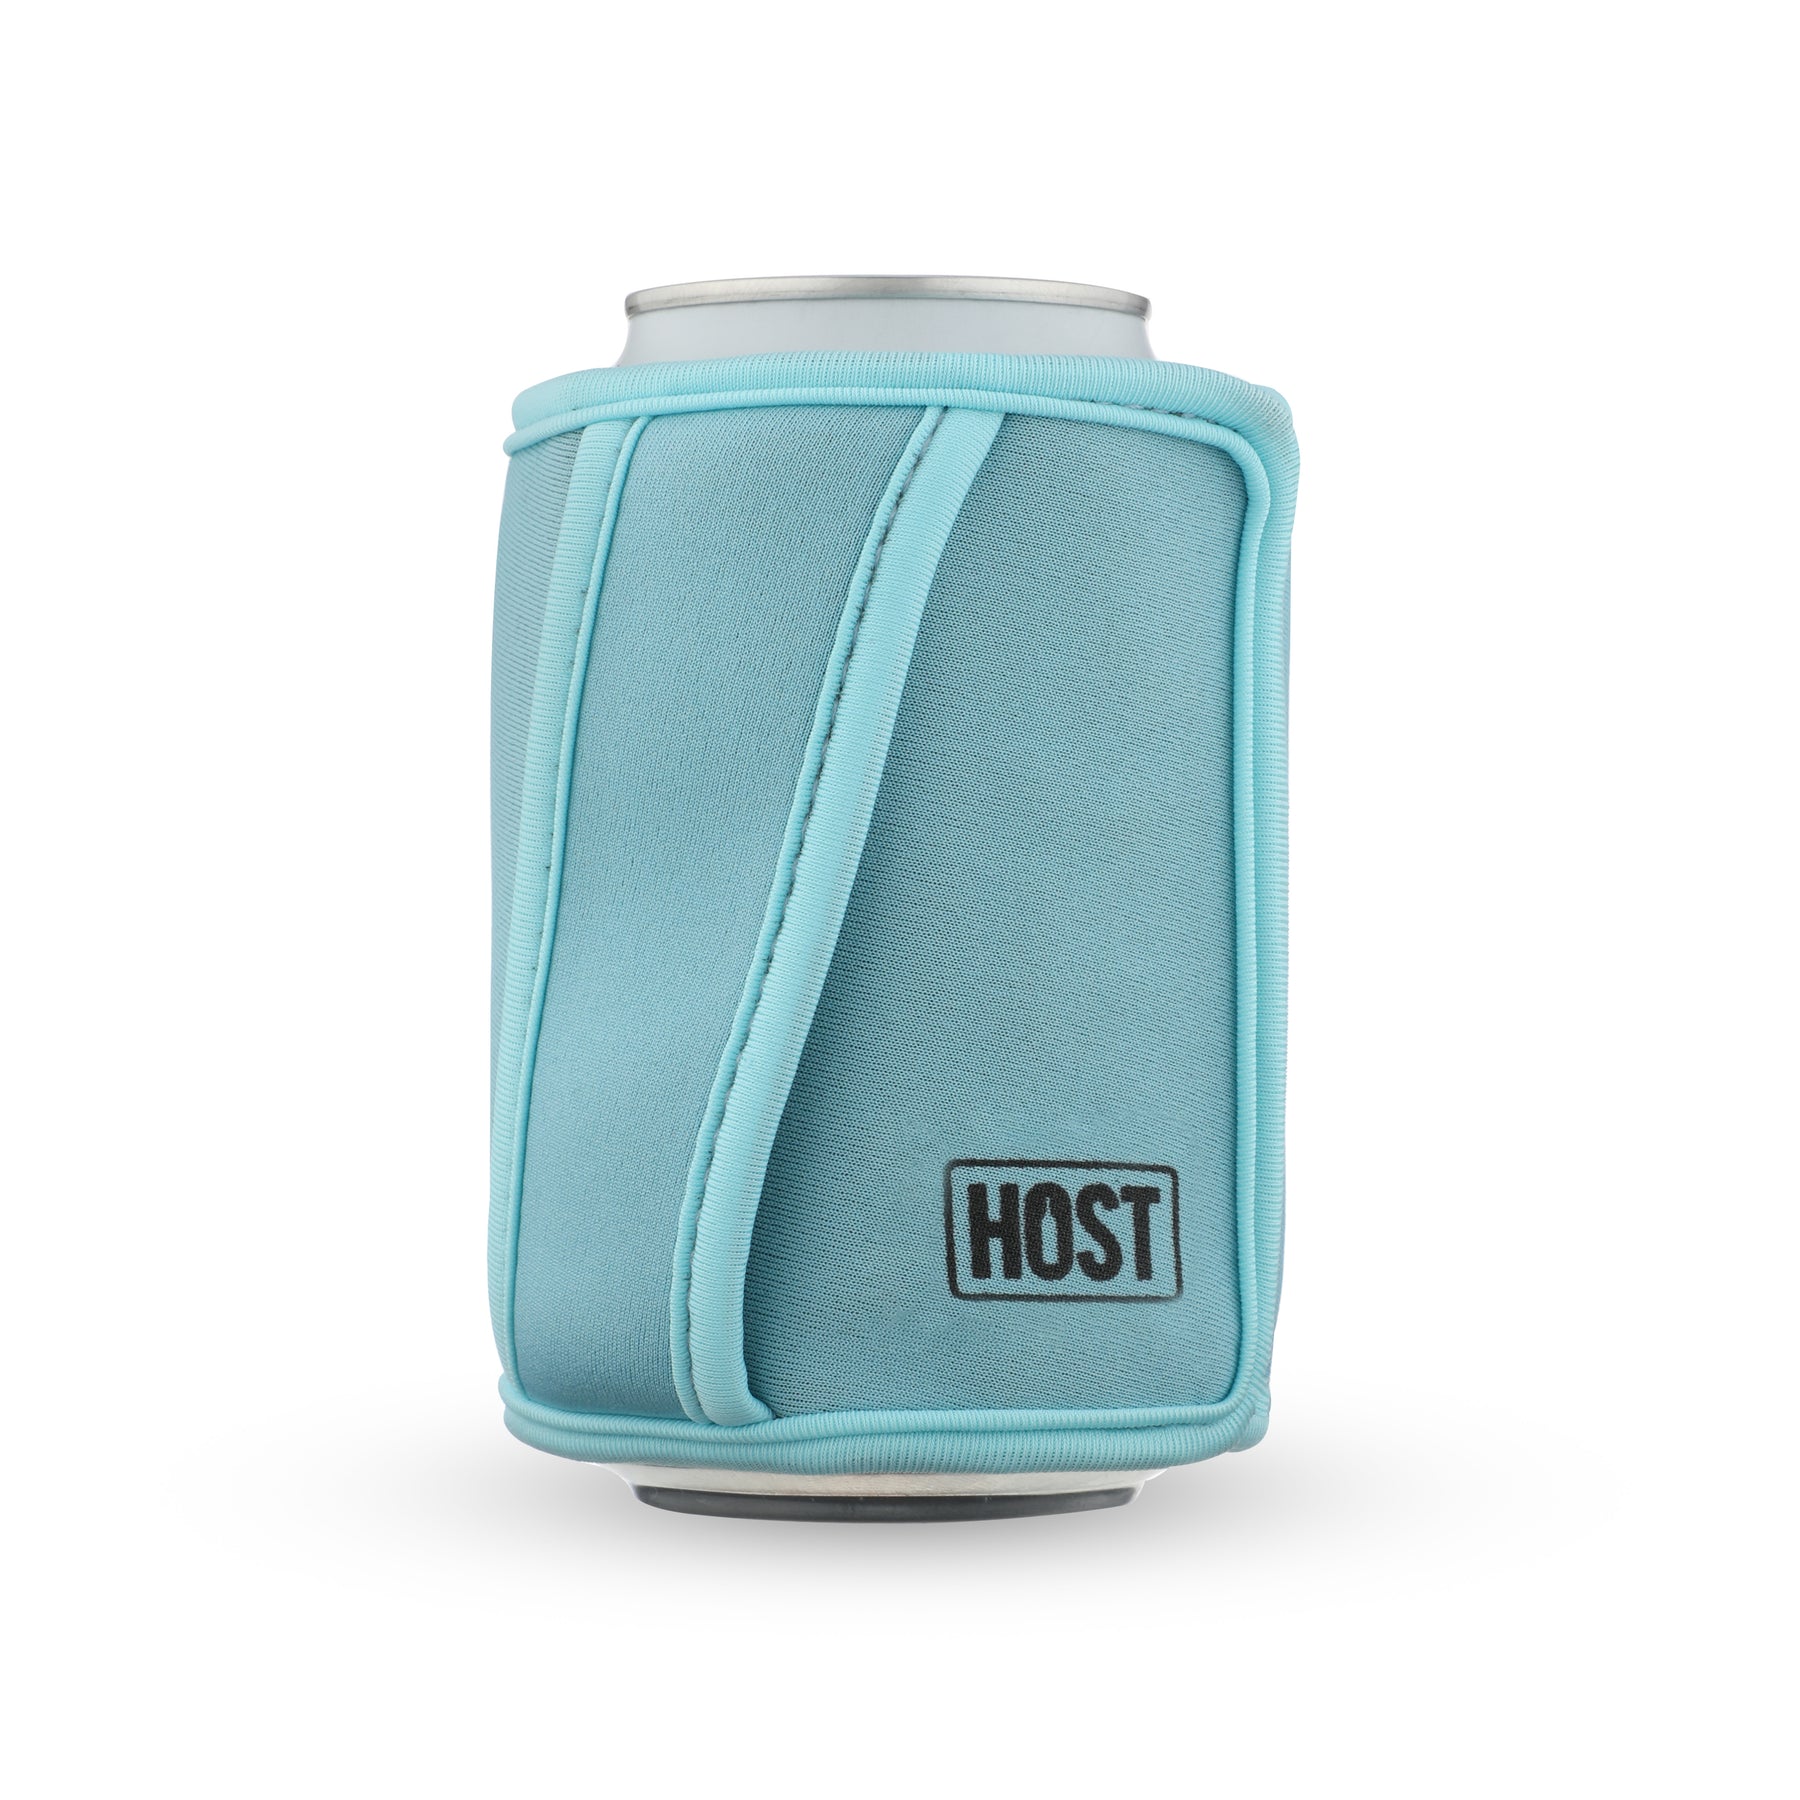 Insta-Chill Slim Can Sleeve in Green by Host